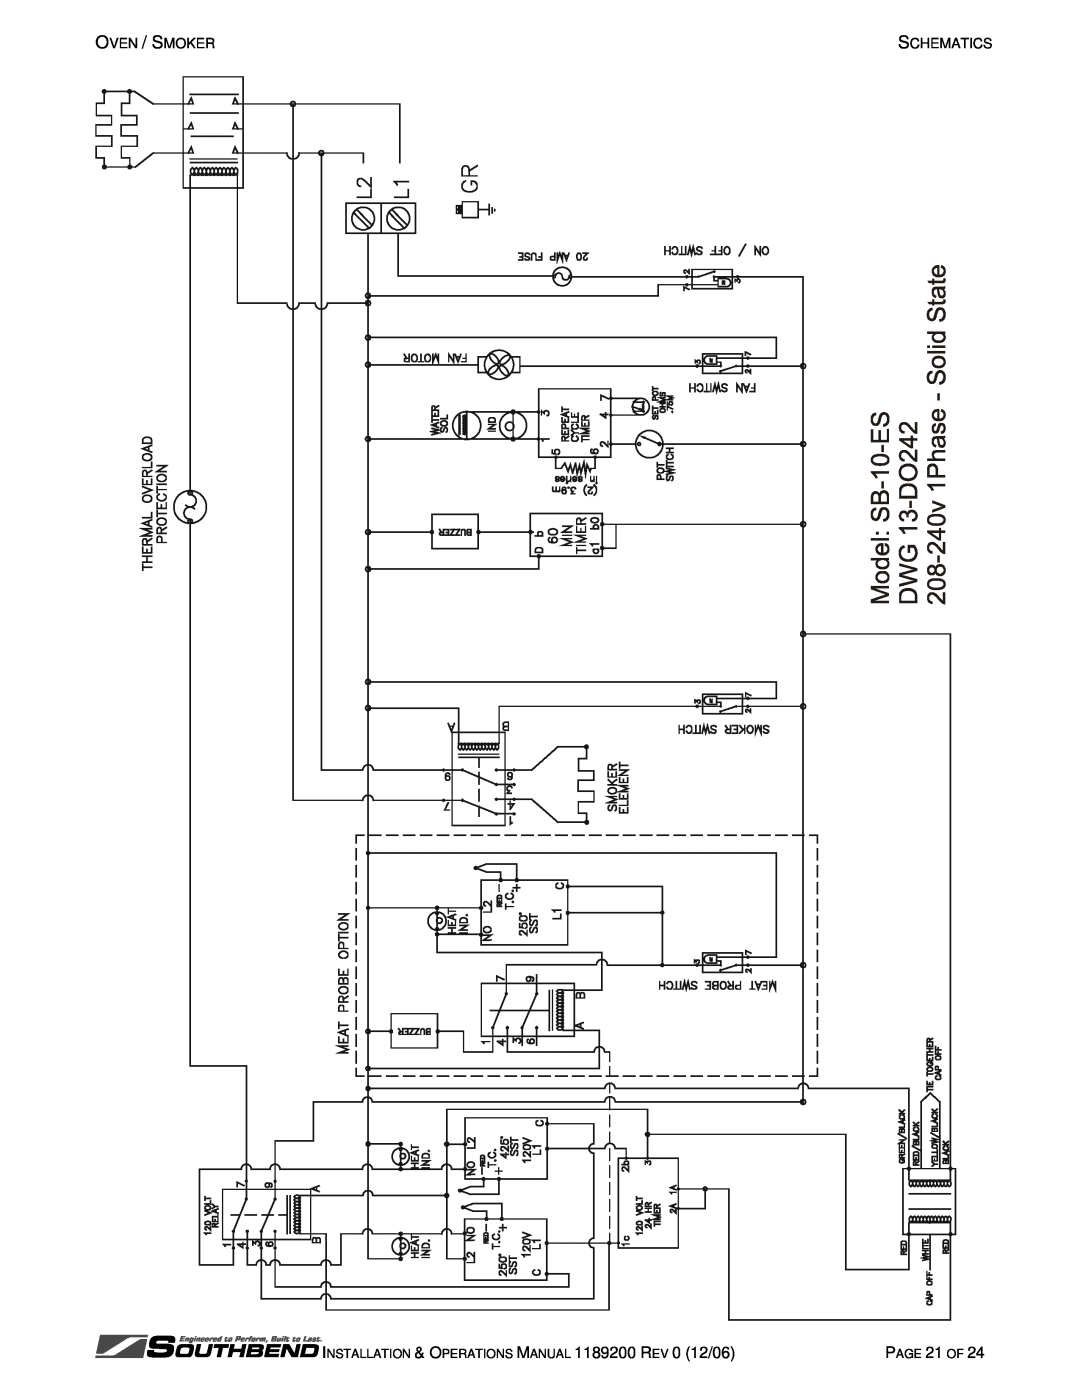 Southbend SB-5-ES, SB-10-ES Oven / Smoker, Schematics, INSTALLATION & OPERATIONS MANUAL 1189200 REV 0 12/06, PAGE 21 OF 